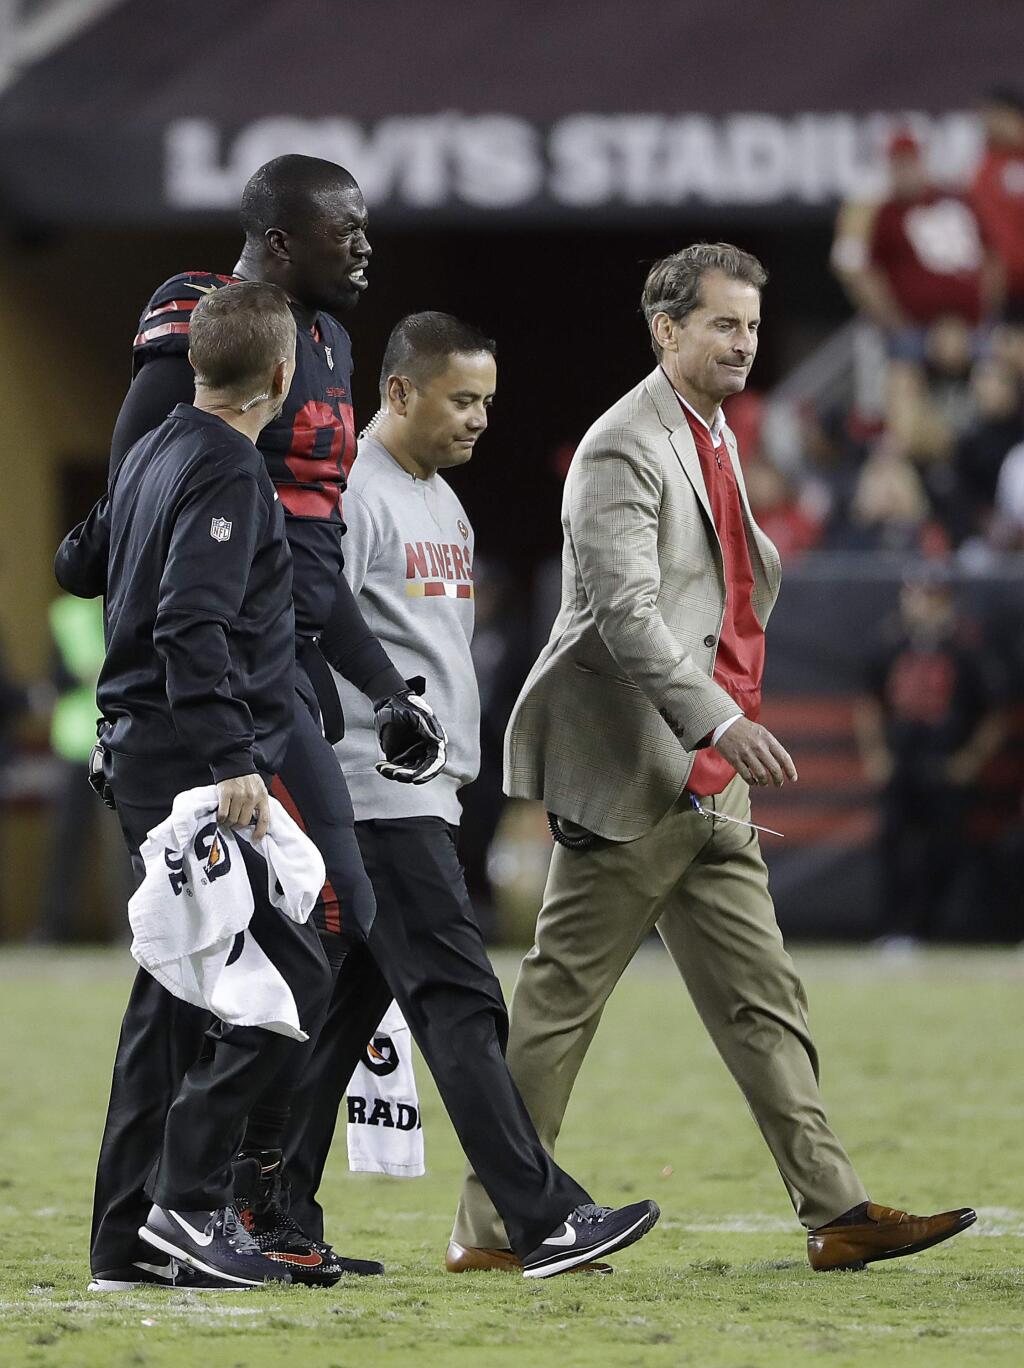 San Francisco 49ers defensive end Tank Carradine (95) walks off the field with trainers during the second half of an NFL football game against the Los Angeles Rams in Santa Clara, Calif., Thursday, Sept. 21, 2017. (AP Photo/Marcio Jose Sanchez)